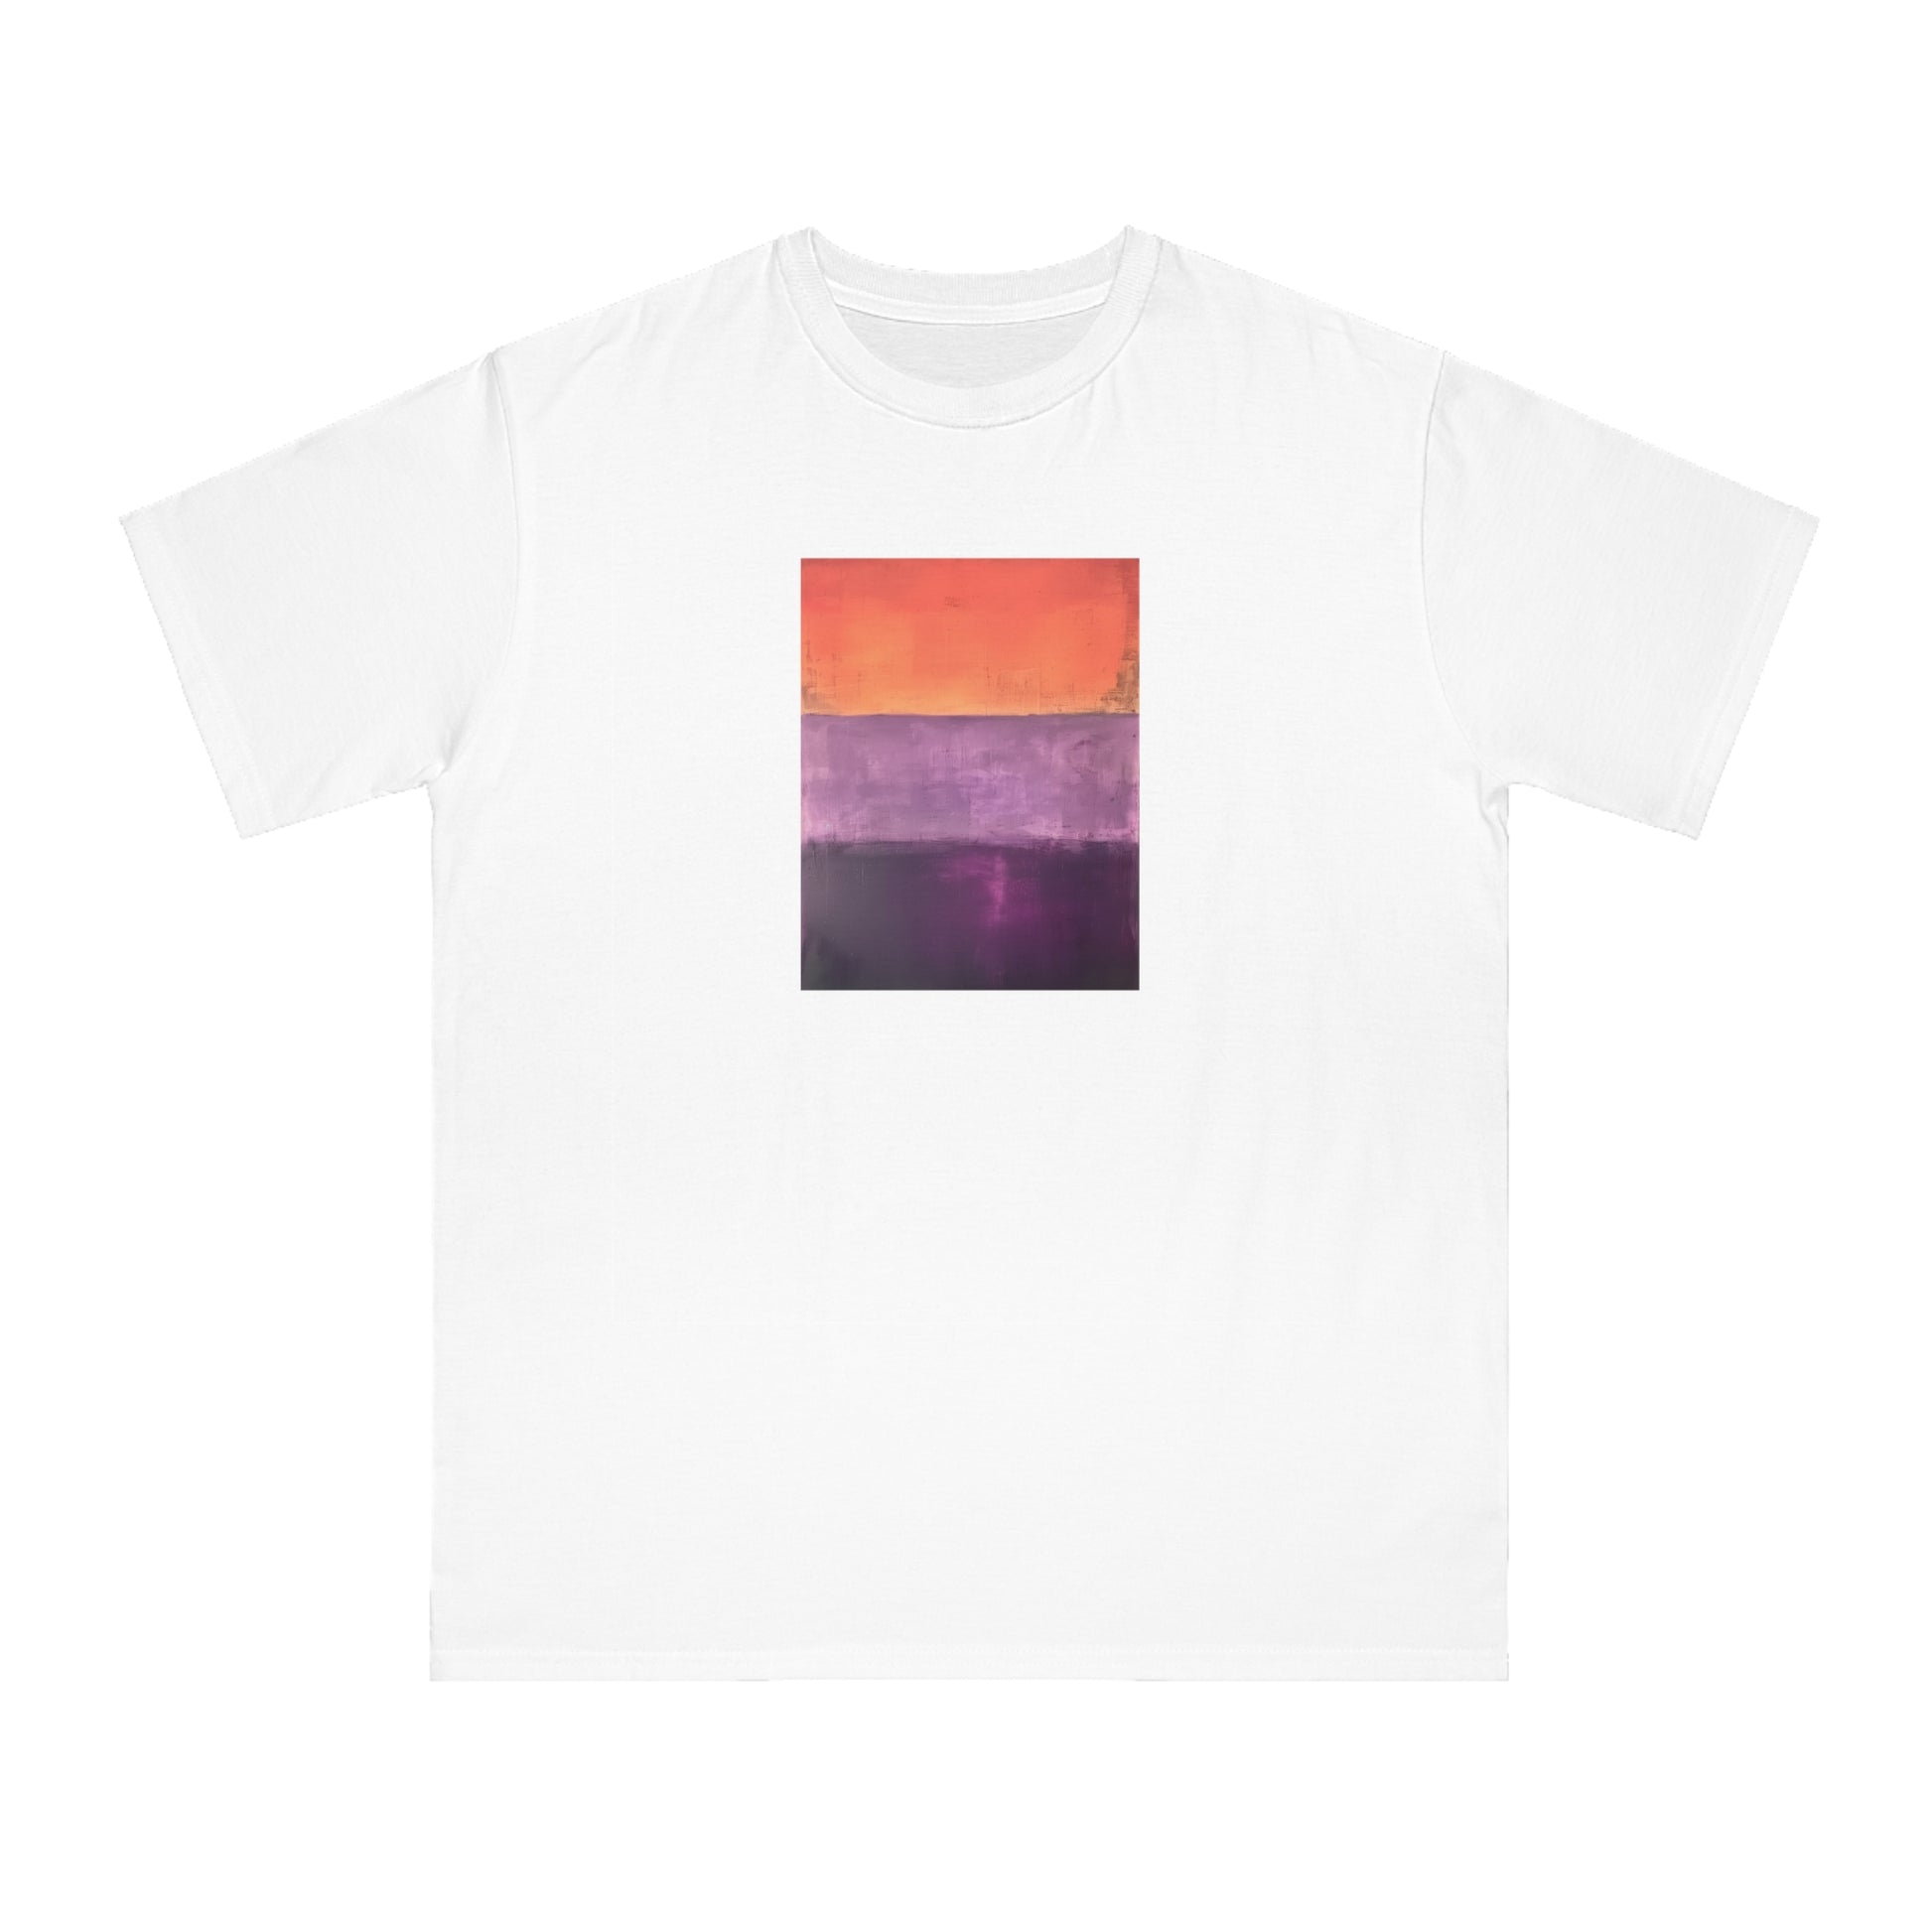 a white t - shirt with an orange and purple painting on it